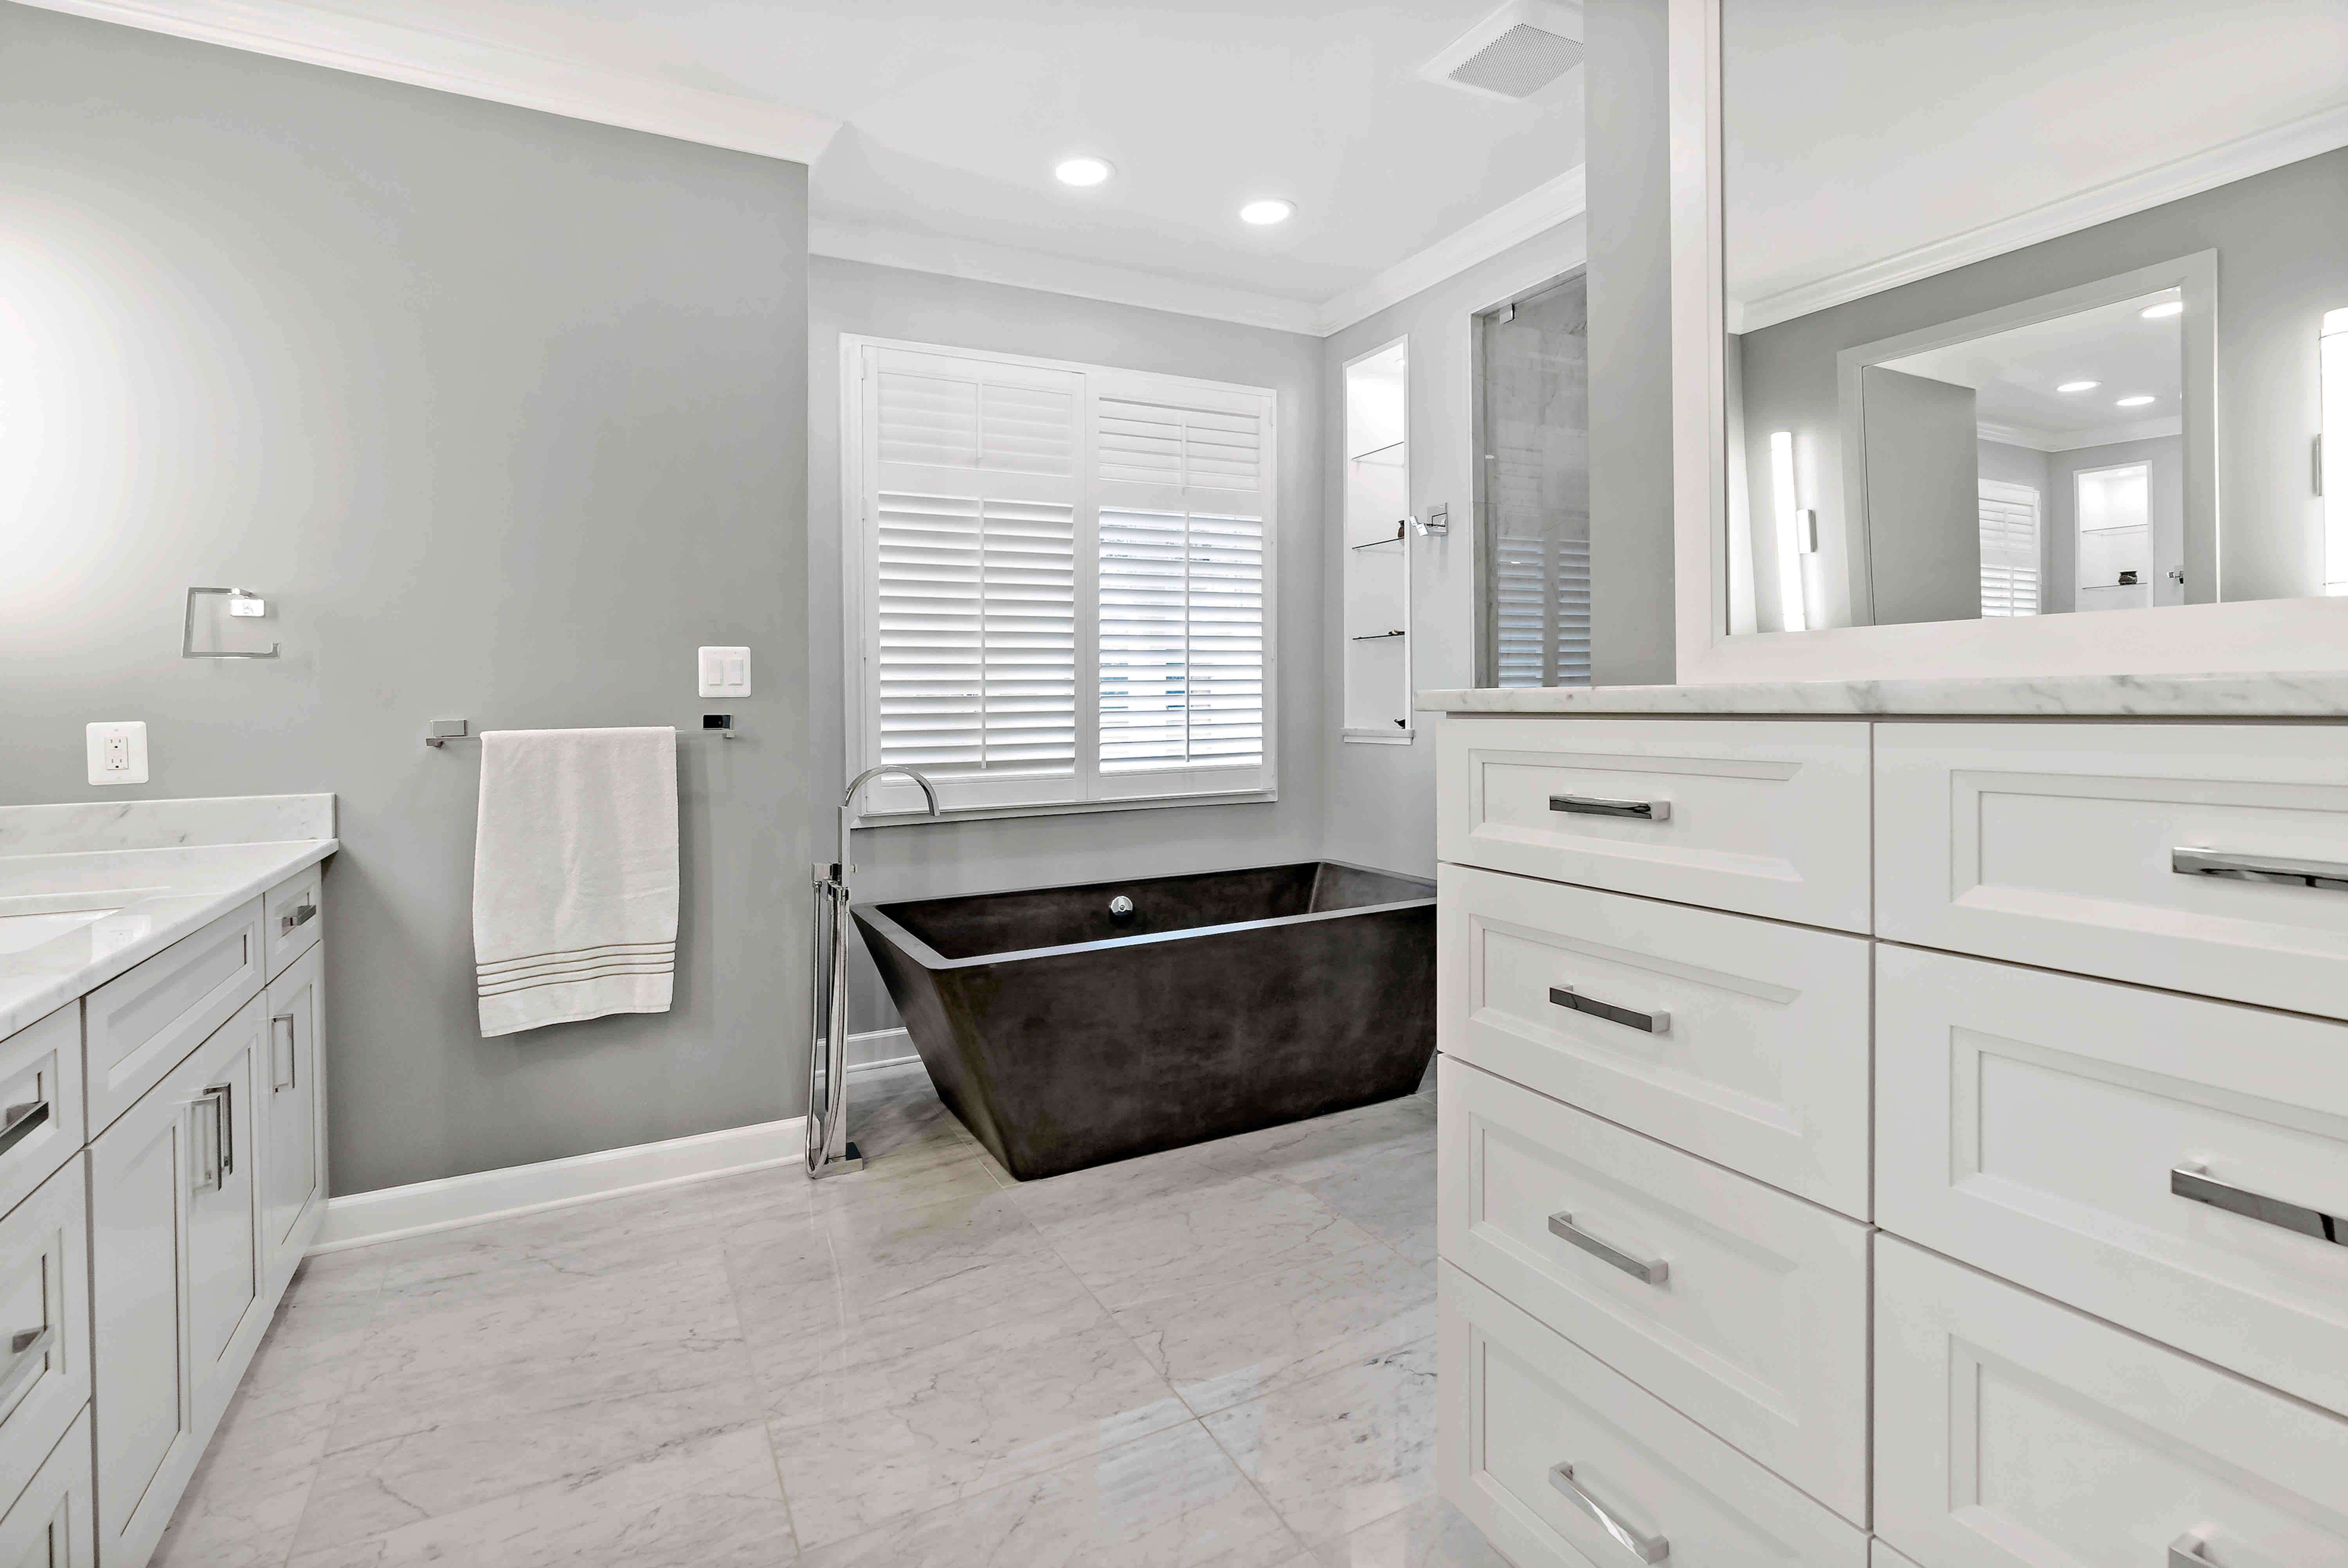 Large full bathroom with white cabinets